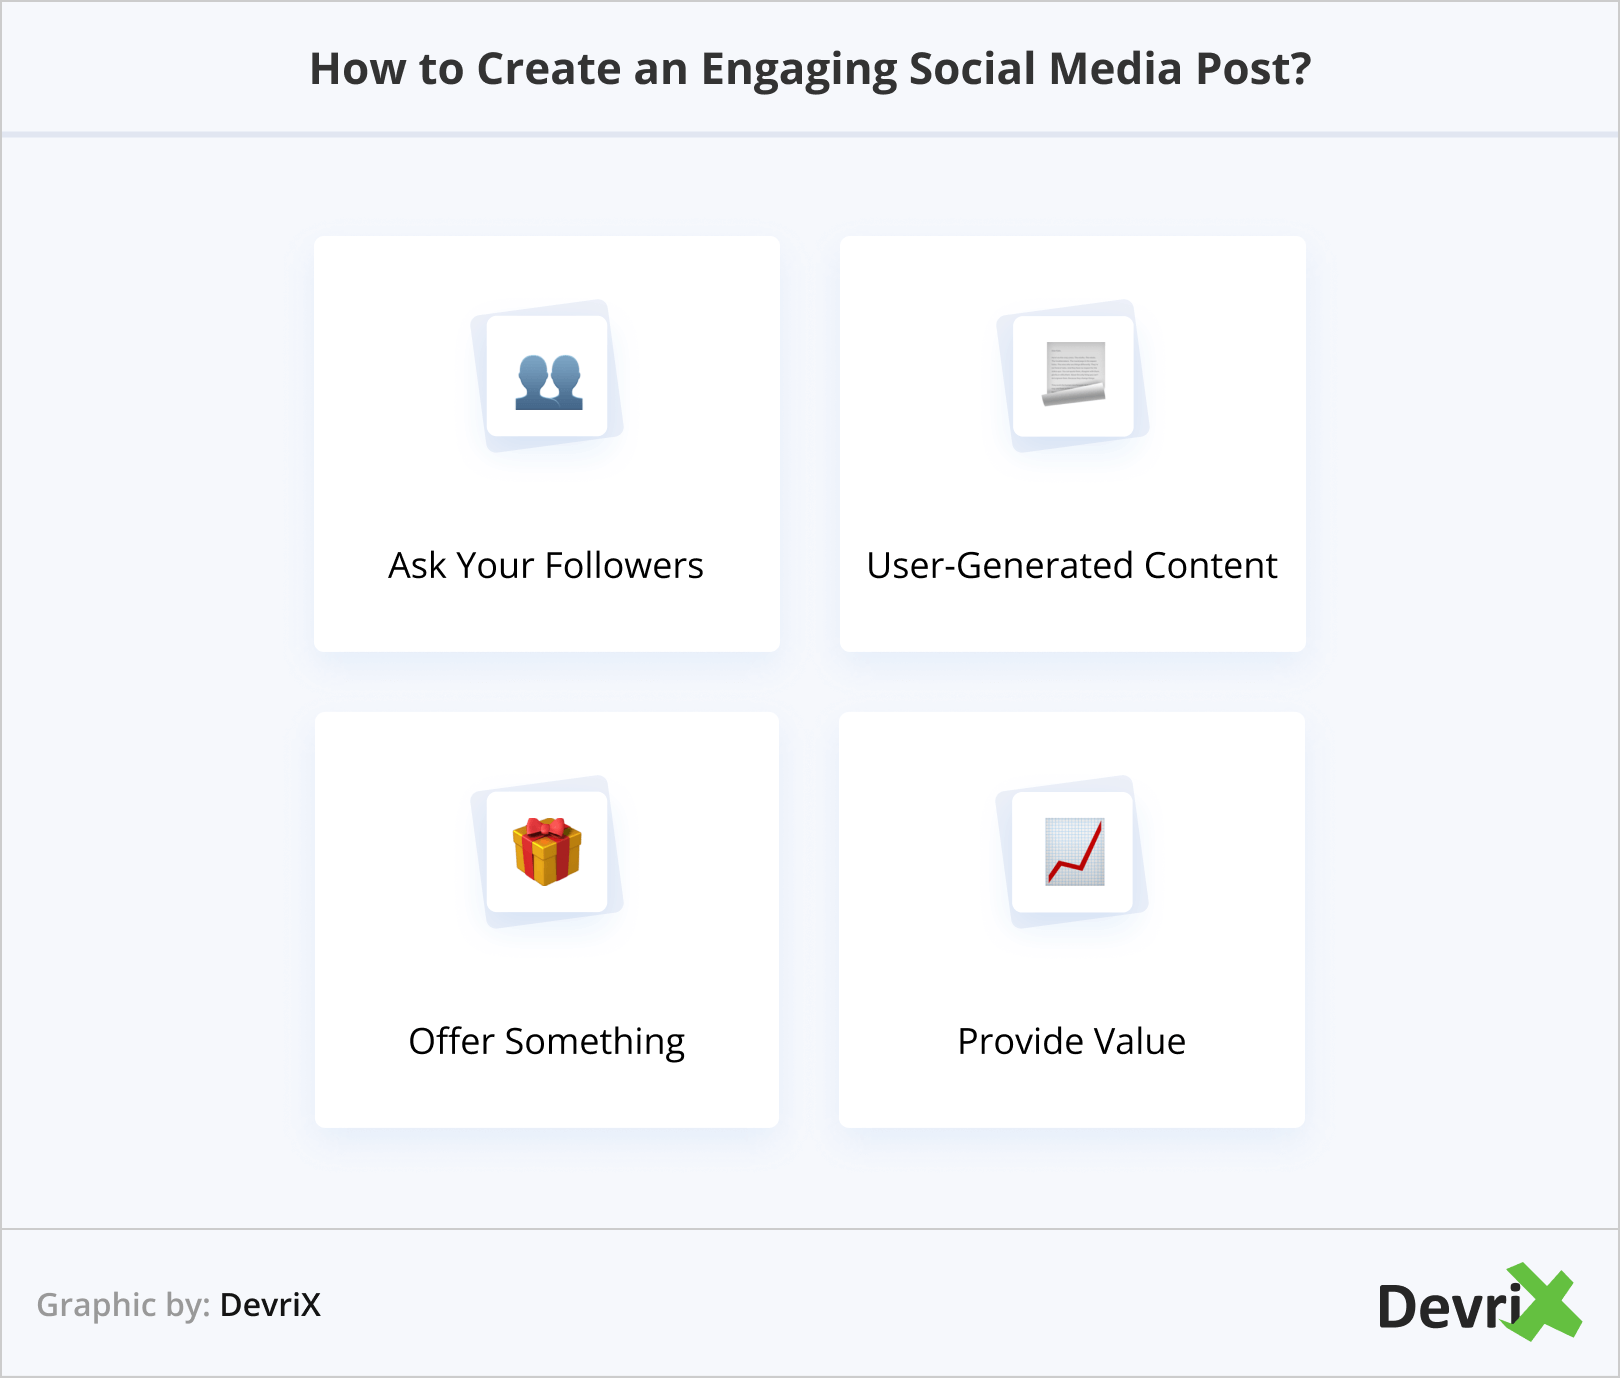 How to Create an Engaging Social Media Post